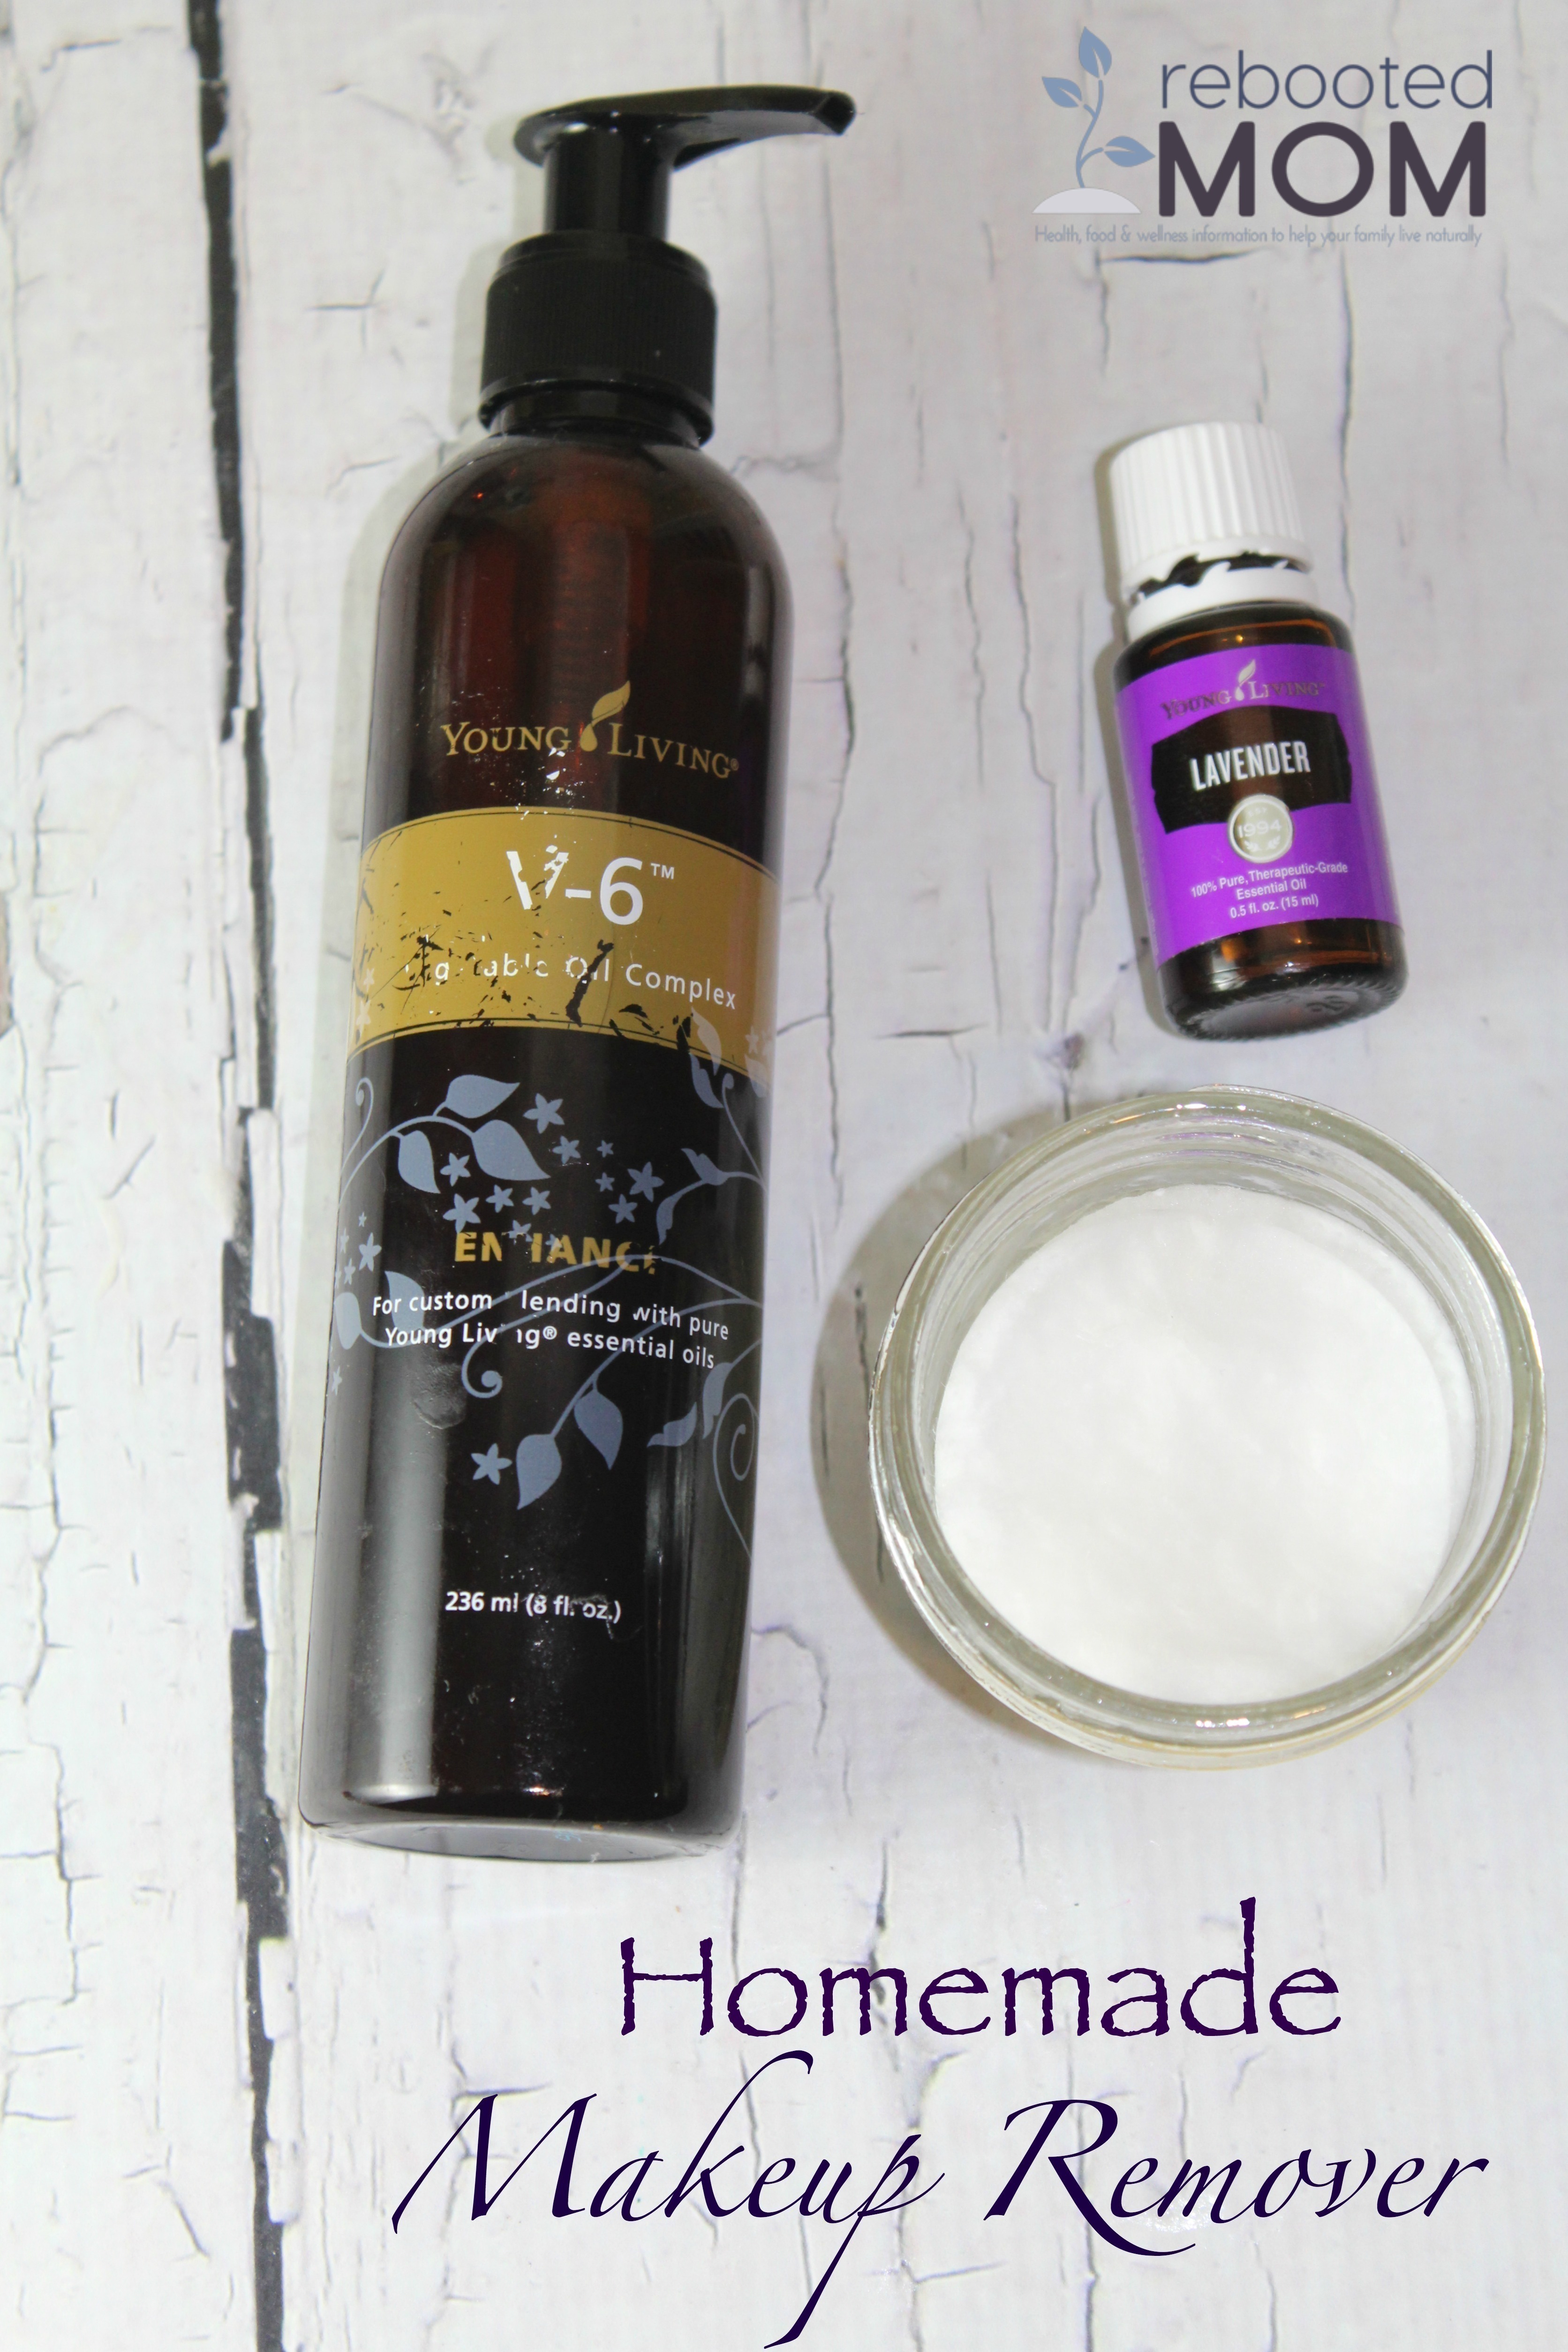 This Homemade Makeup Remover with Lavender Essential Oil is SUPER easy to make and would be a wonderful addition to your personal beauty regimen!